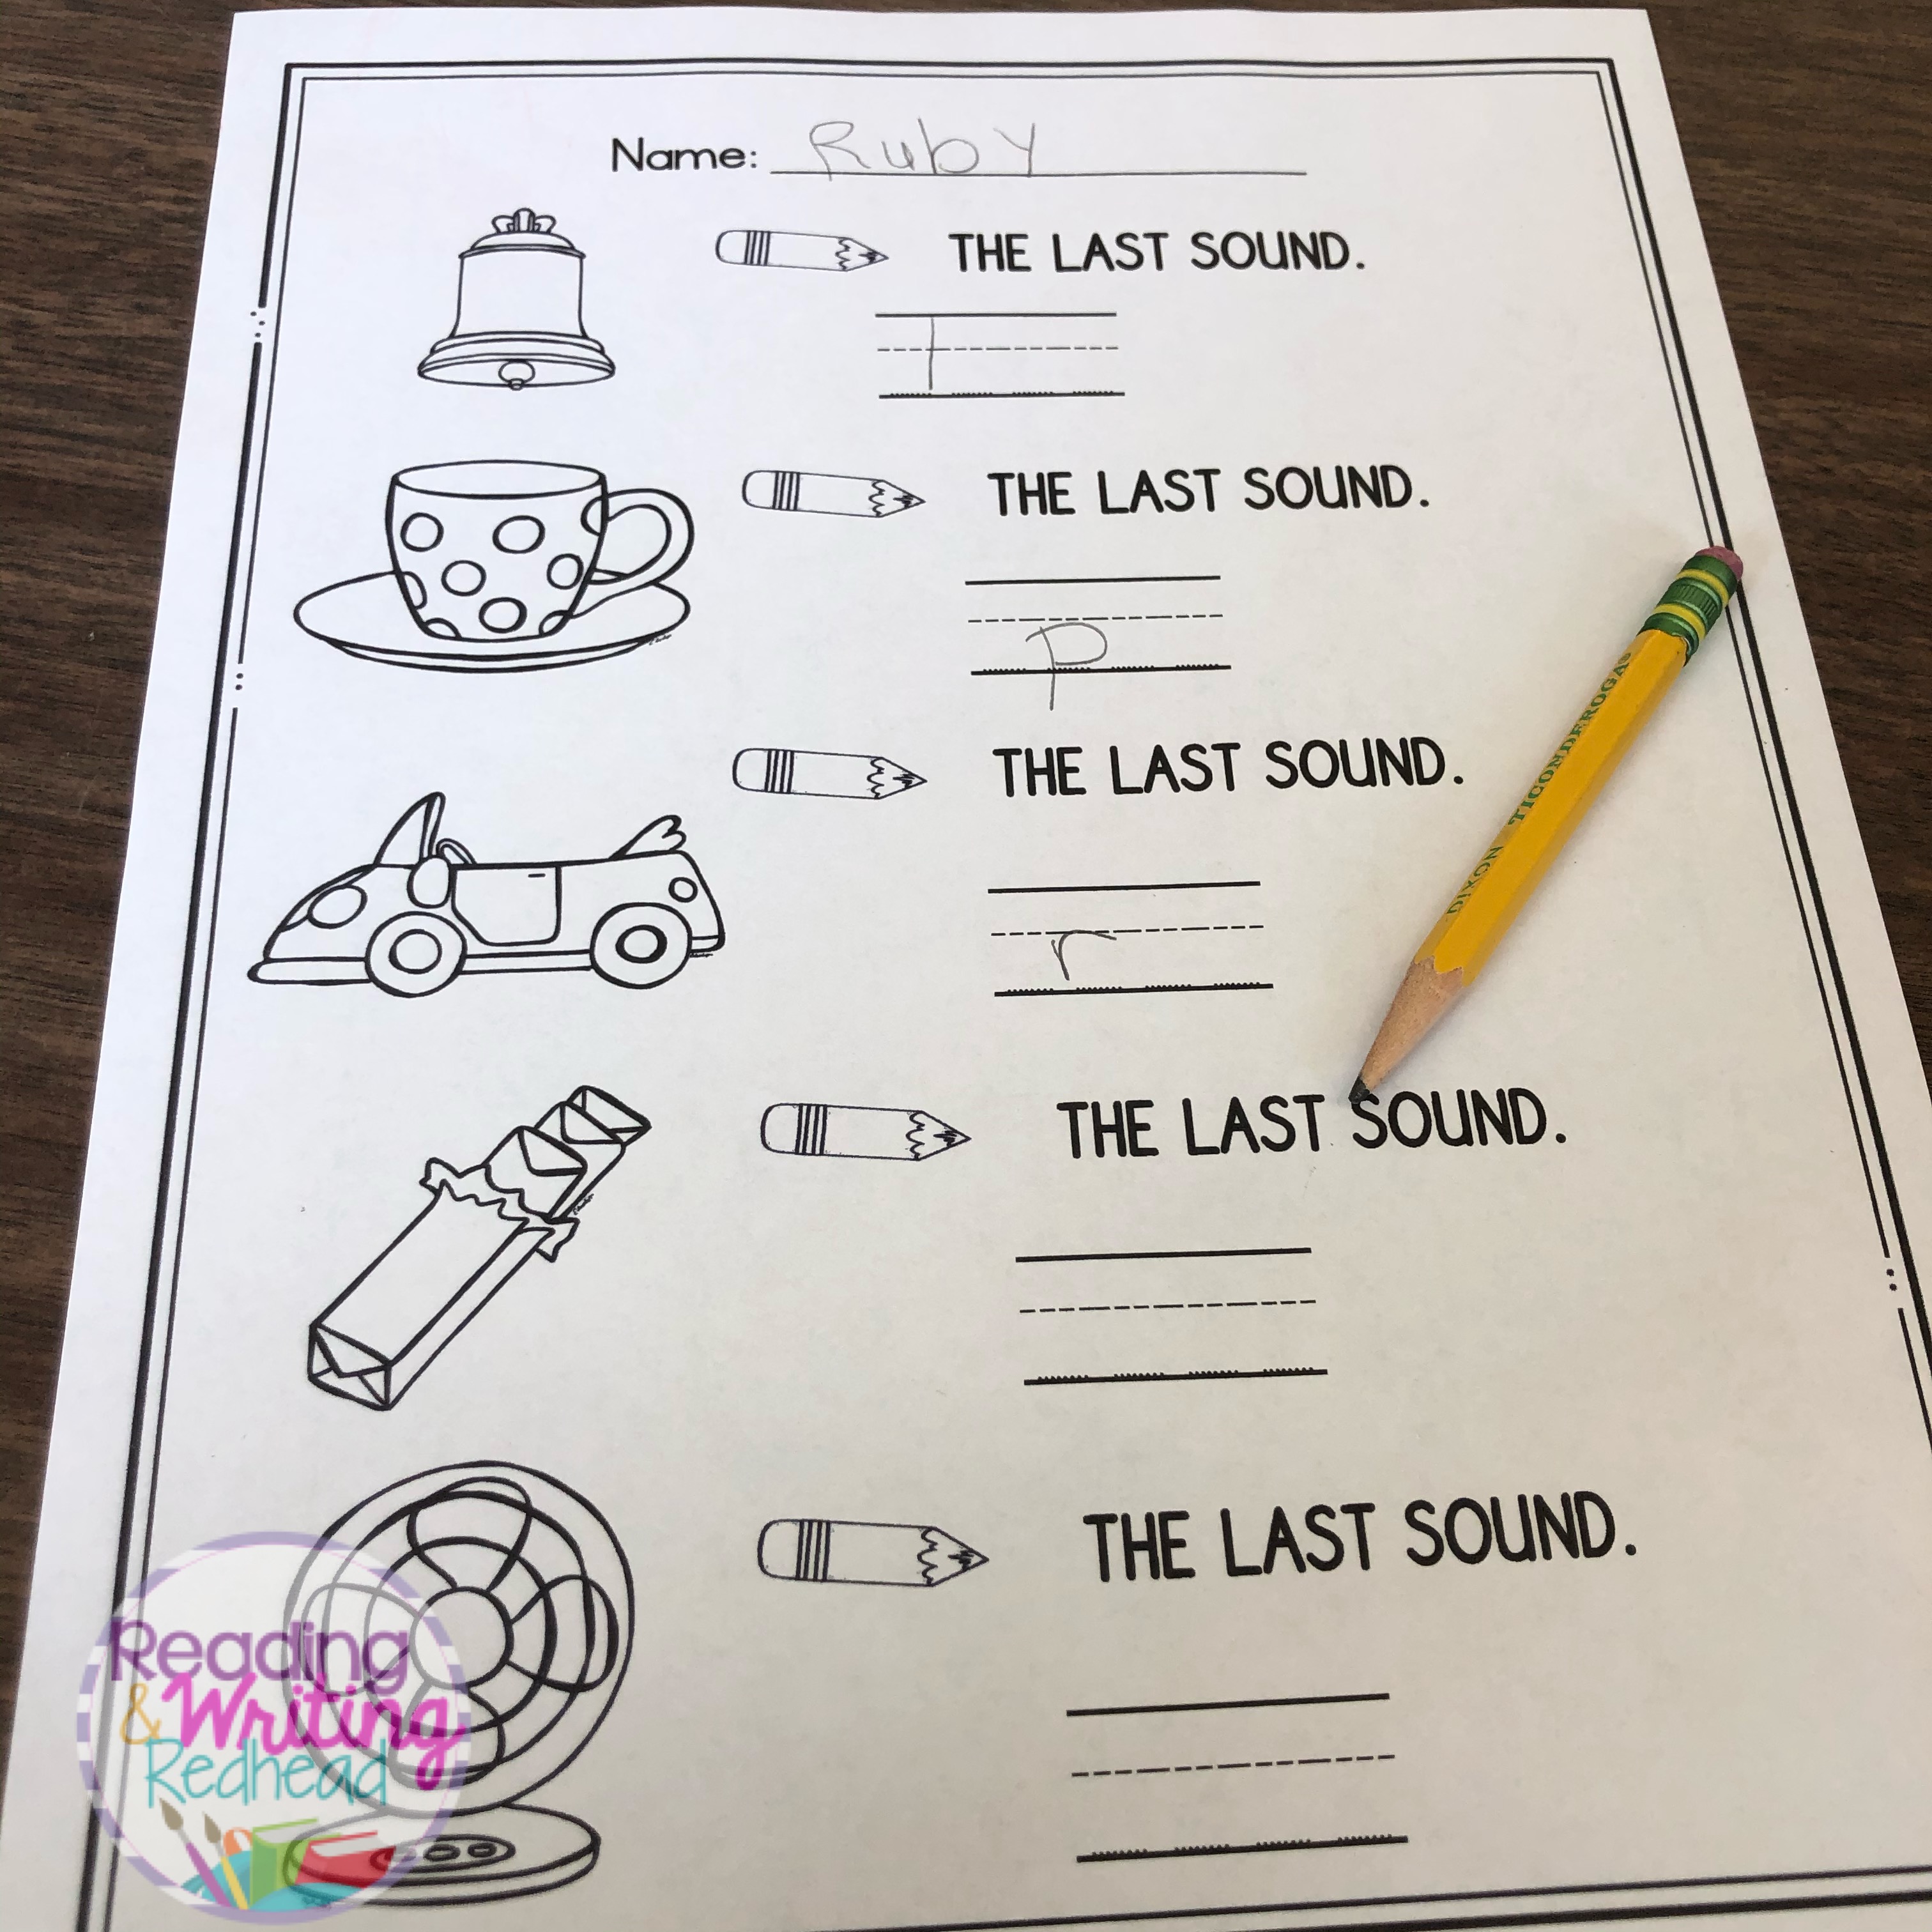 Write the last sound of the word